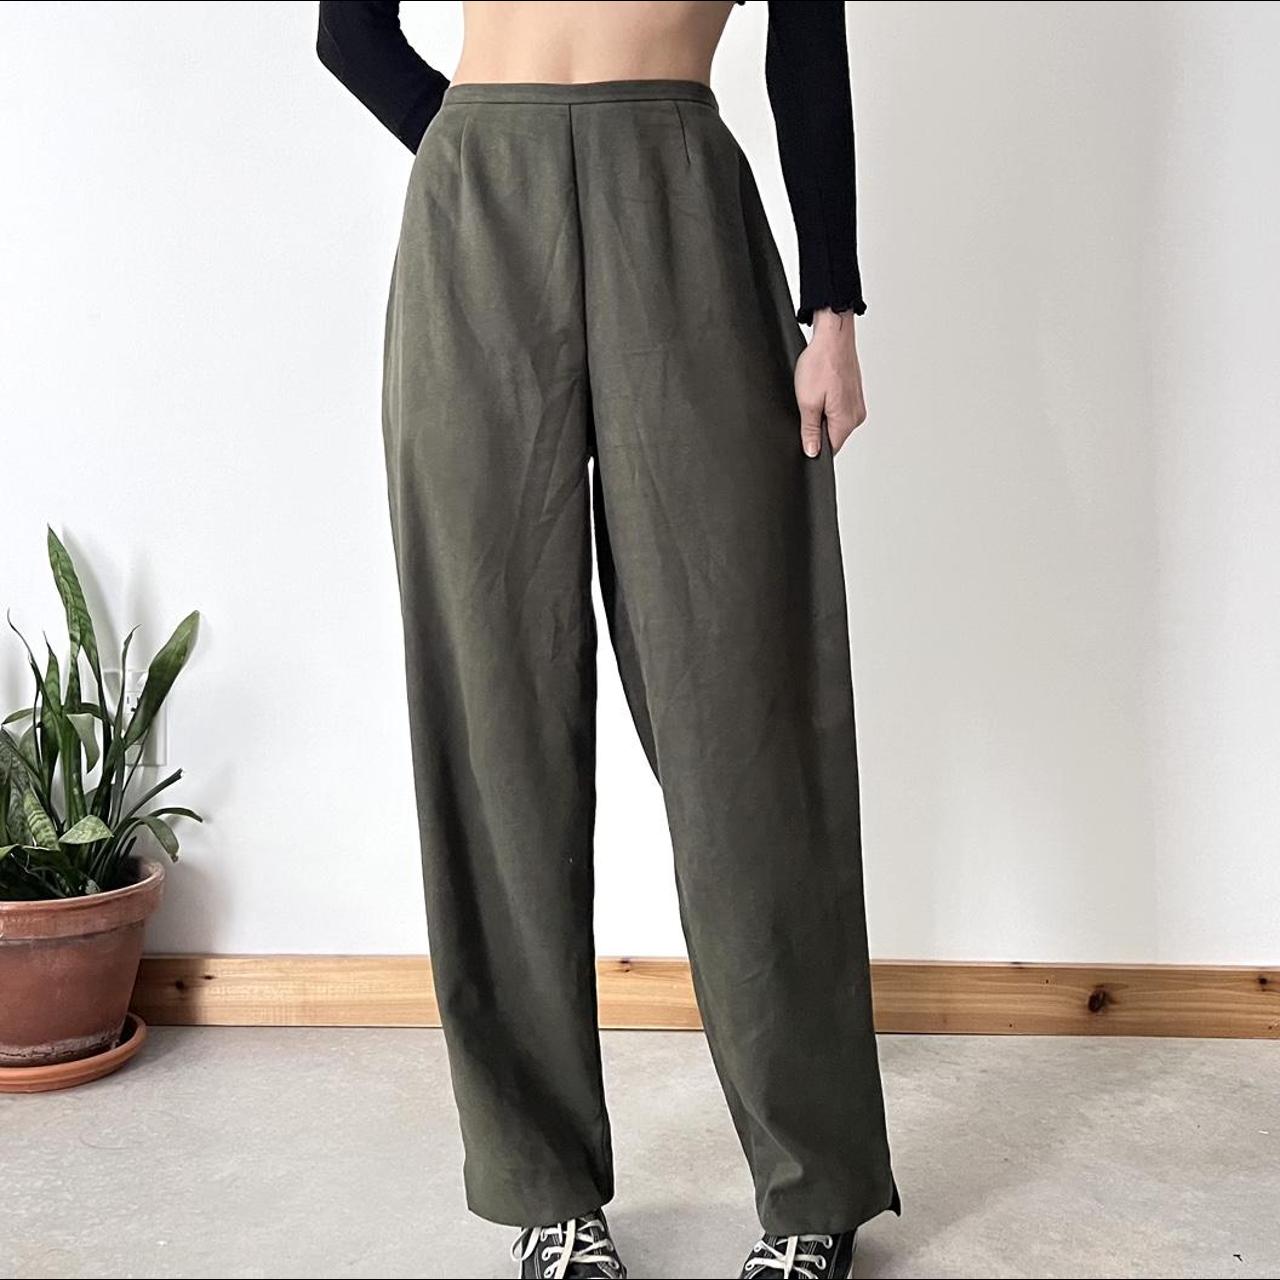 Vintage Green Trousers High waisted fit. They’re a... - Depop